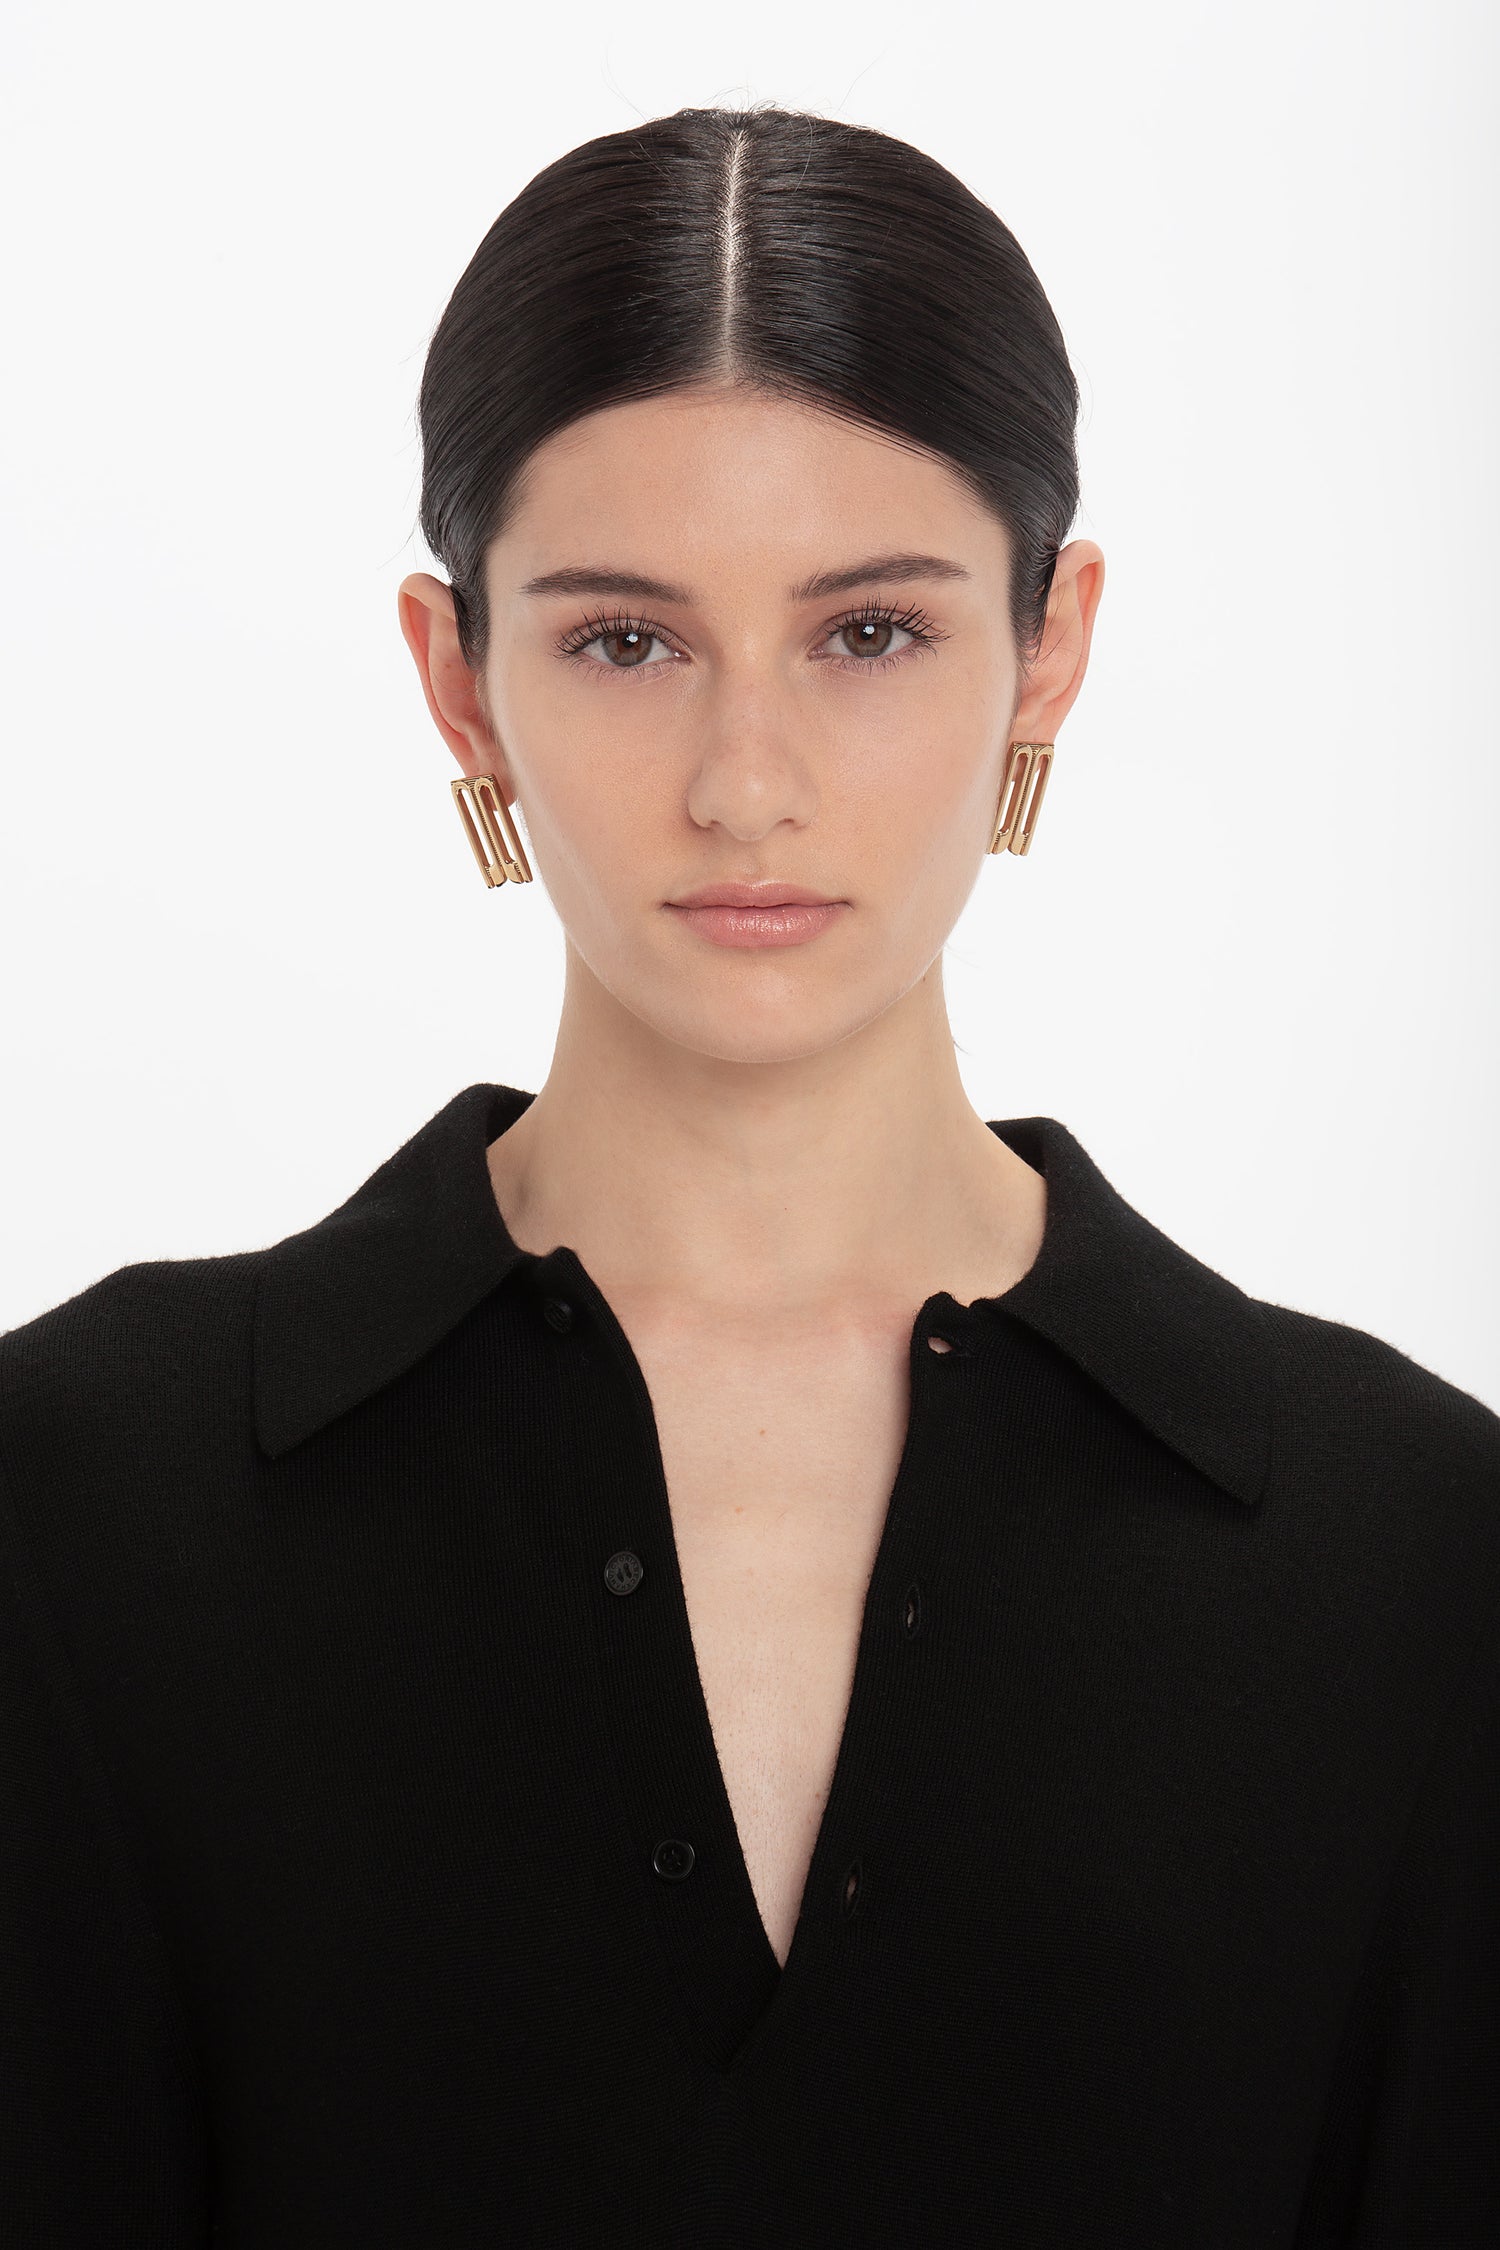 A person with dark hair pulled back wears a black collared shirt and gold rectangular earrings, looking straight ahead with a neutral expression against a plain white background. The asymmetric waist seam of the Henley Shirt Dress In Black by Victoria Beckham adds an intriguing touch to the overall look.